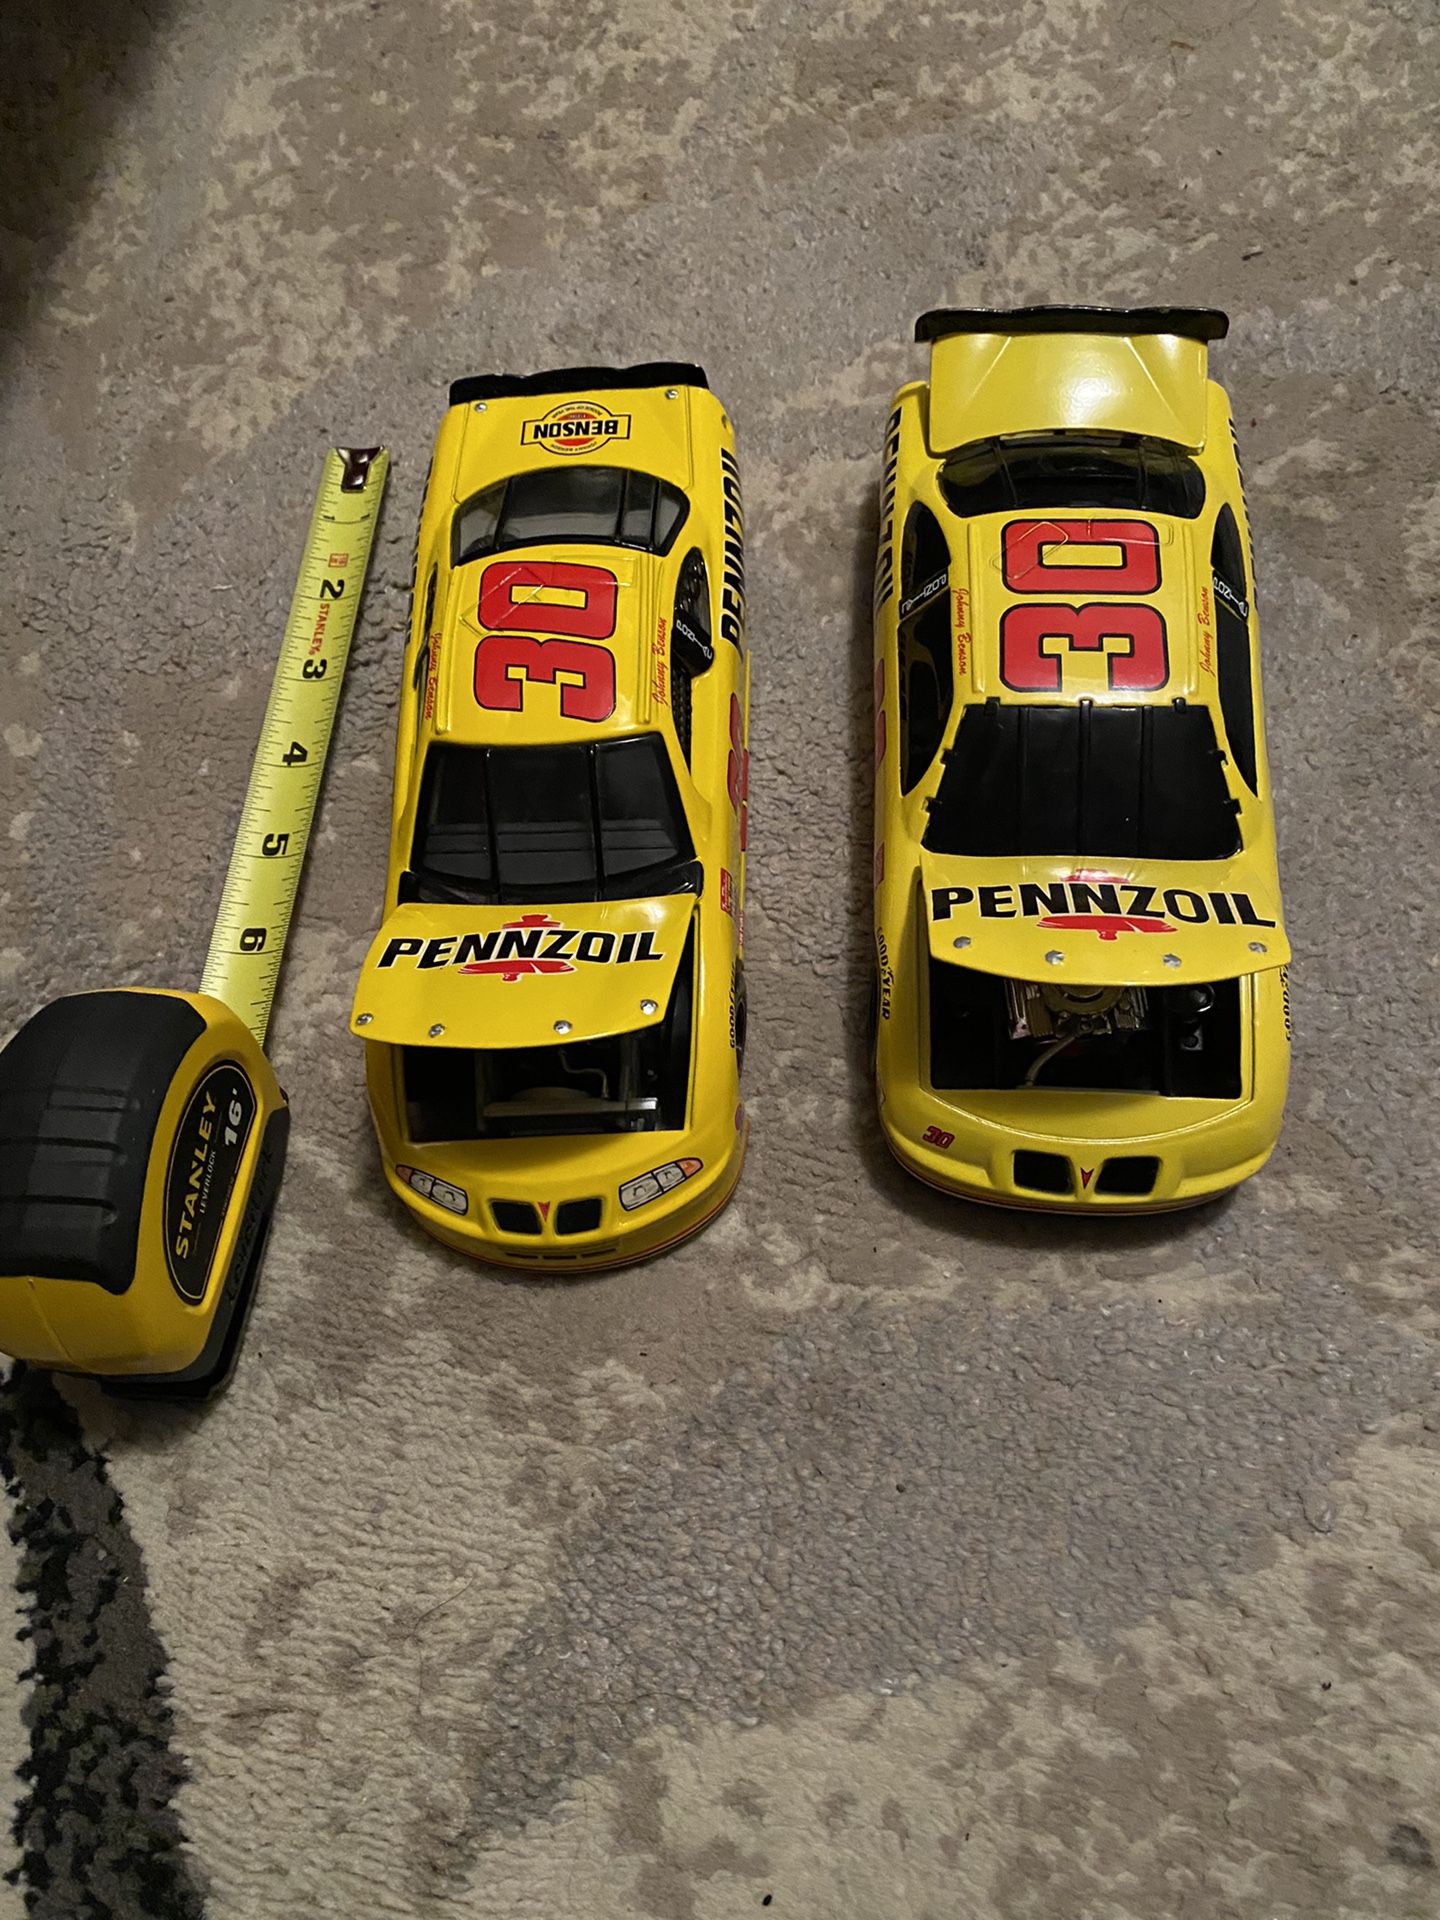 2 Vintage Pennzoil cars 1 is a coin bank 